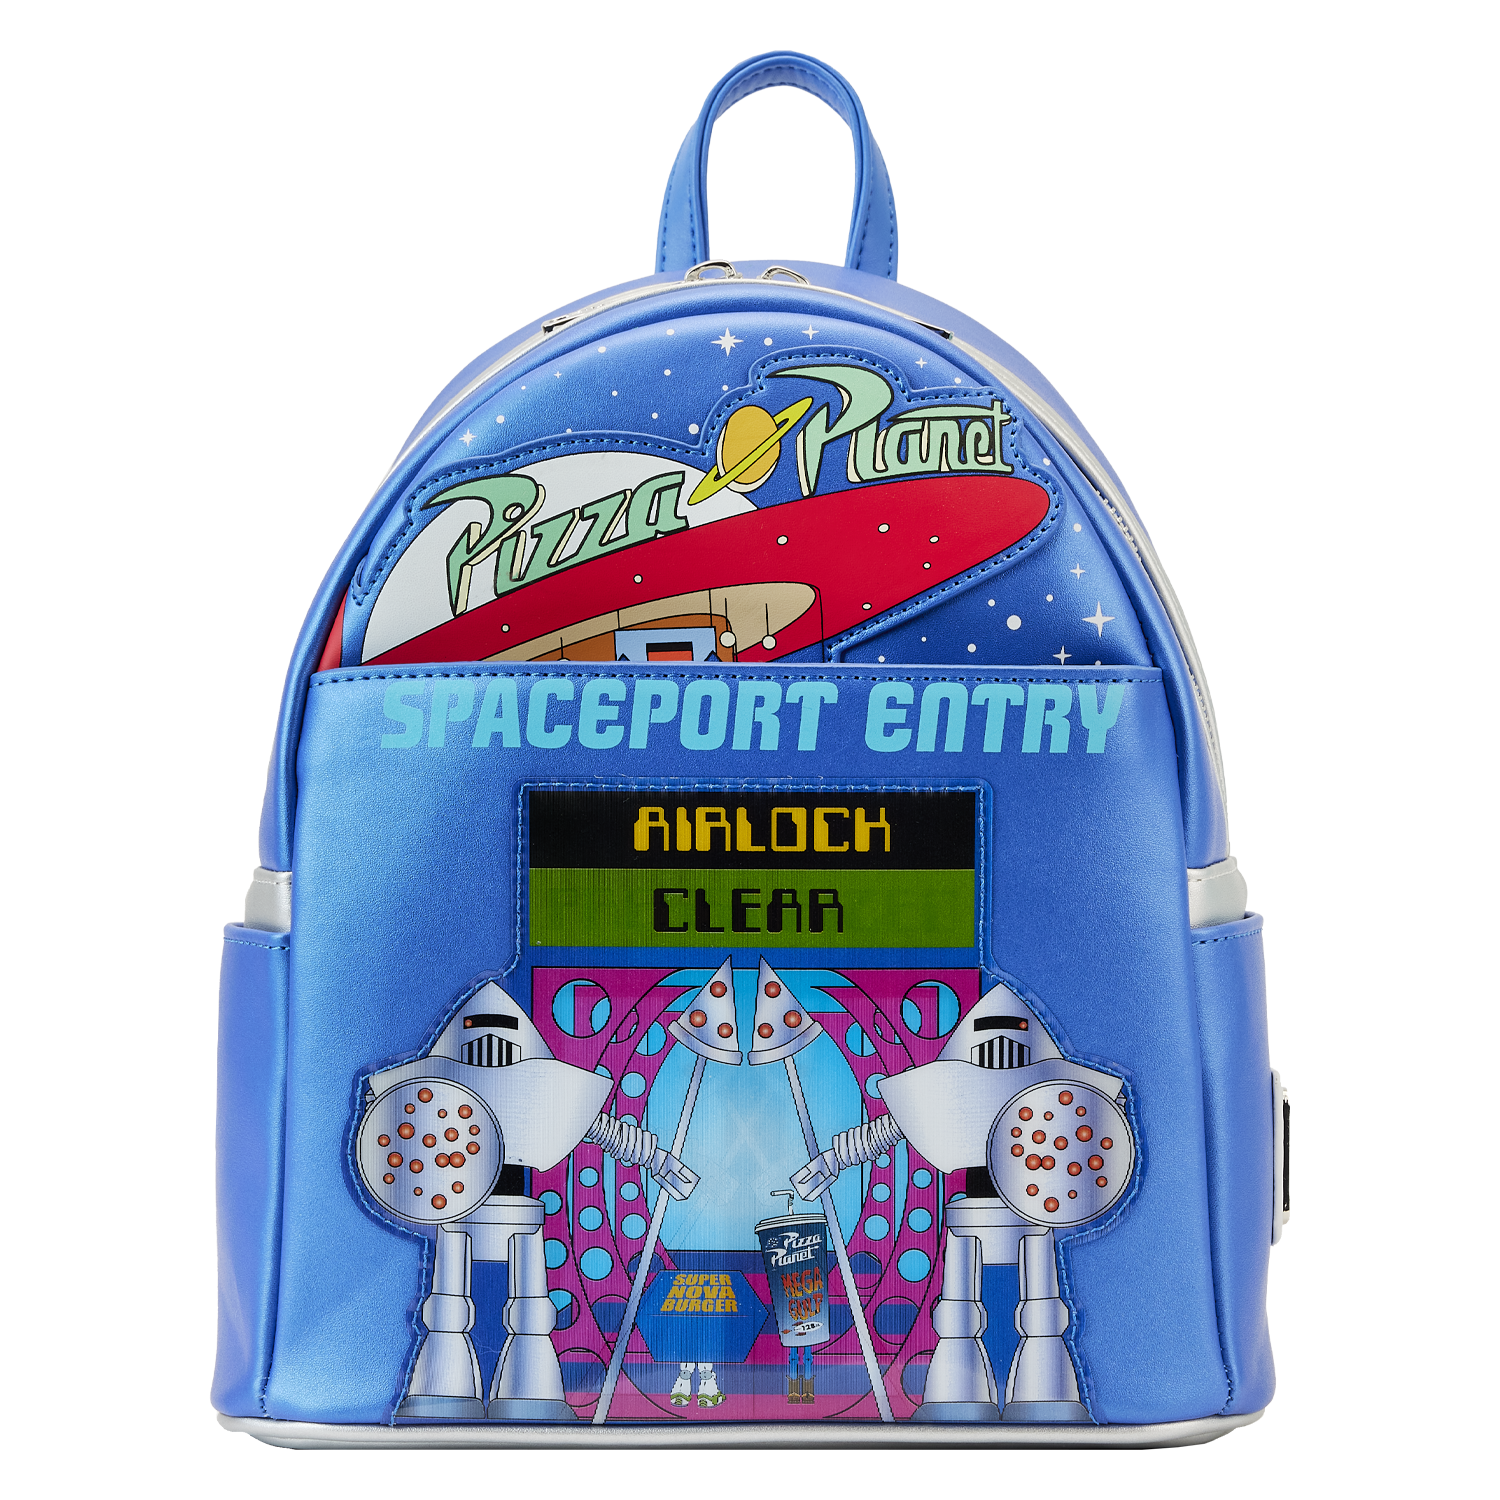 REAL LITTLE BACKPACK - THE TOY STORE